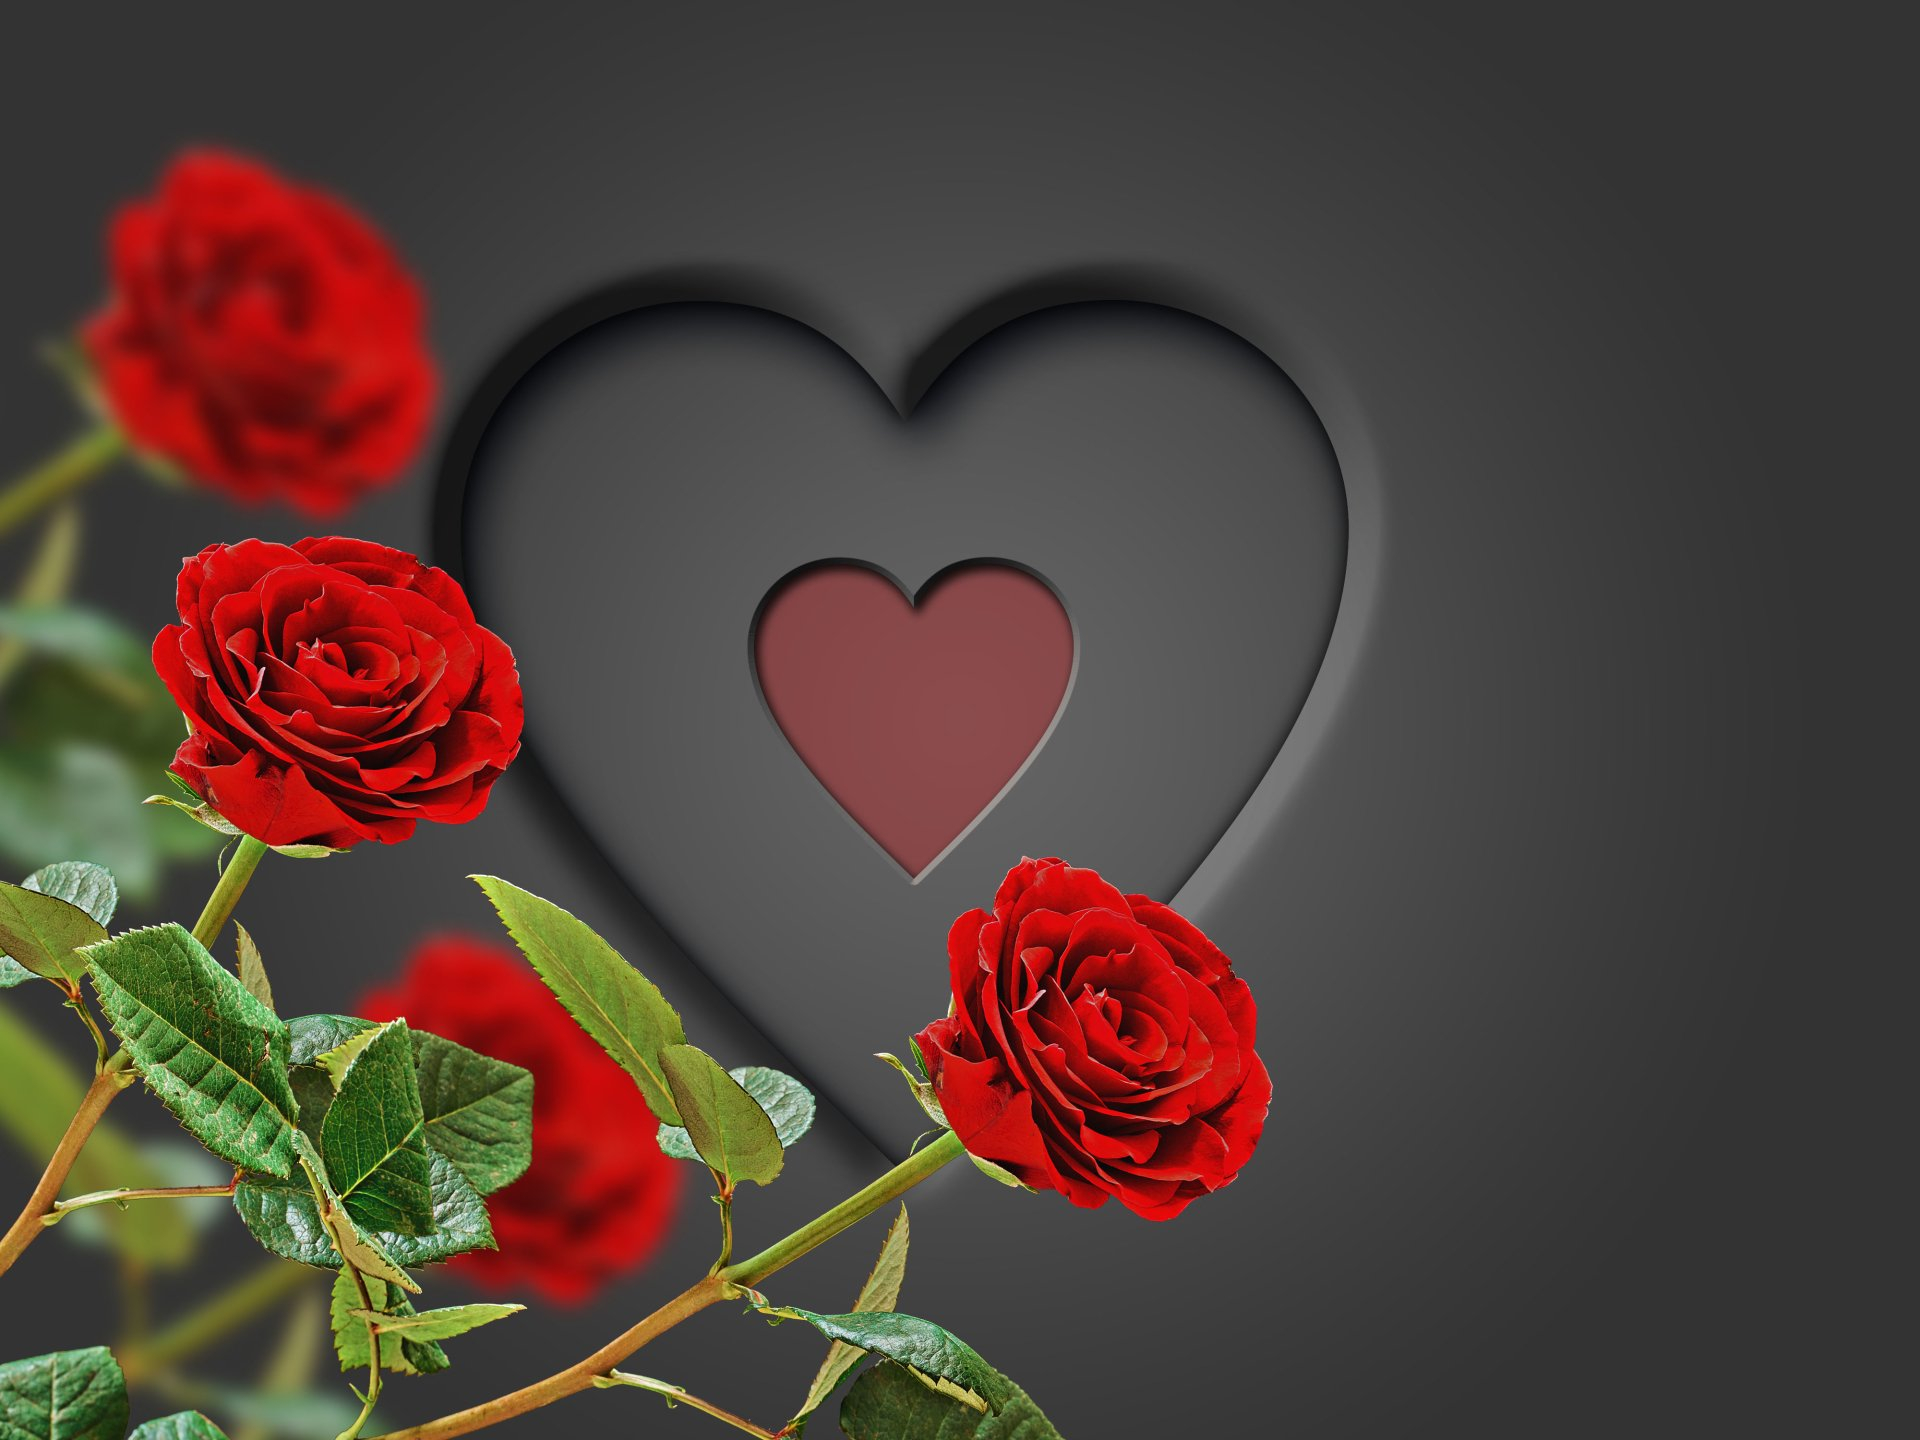 1920x1440 Heart with red roses by Susanlu4esm